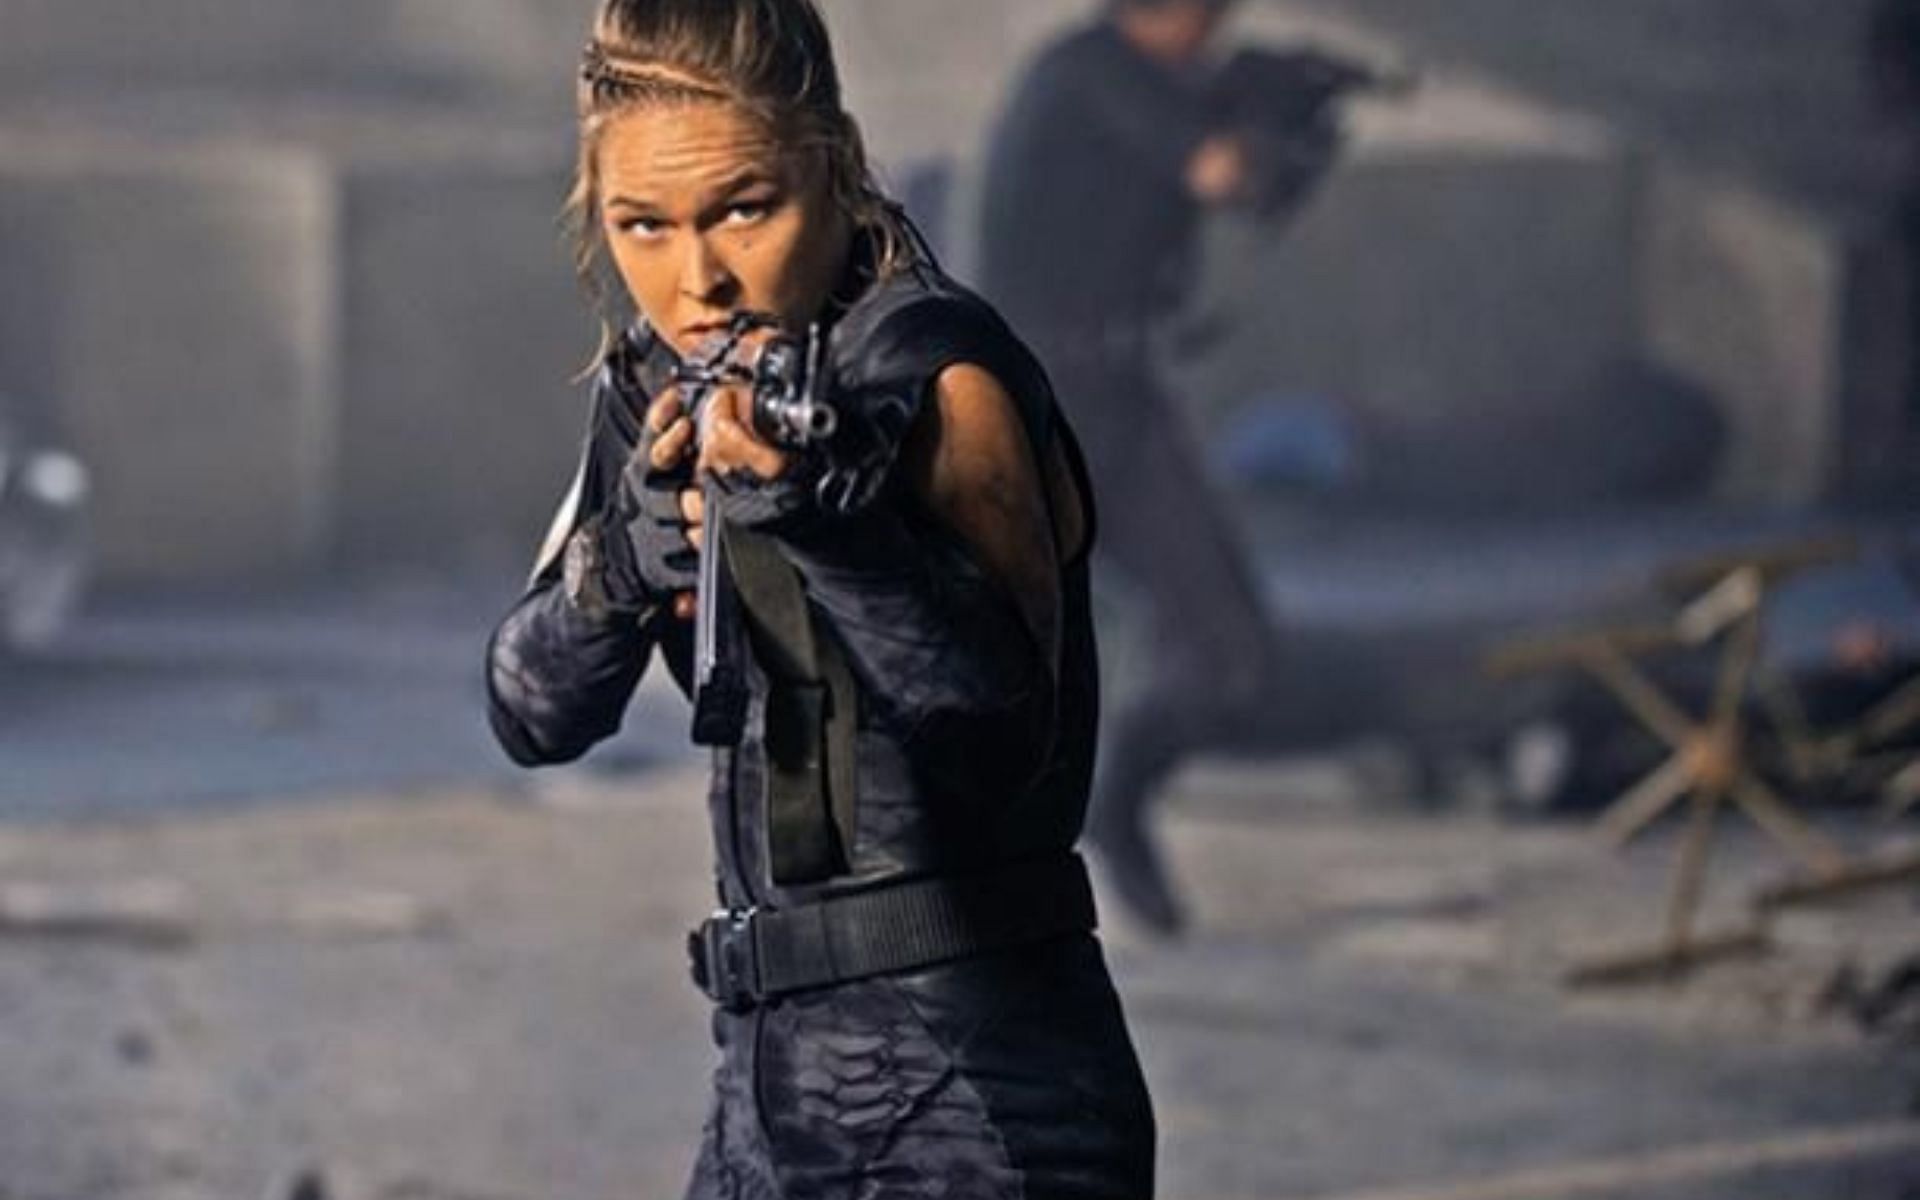 Ronda Rousey in The Expendables 3